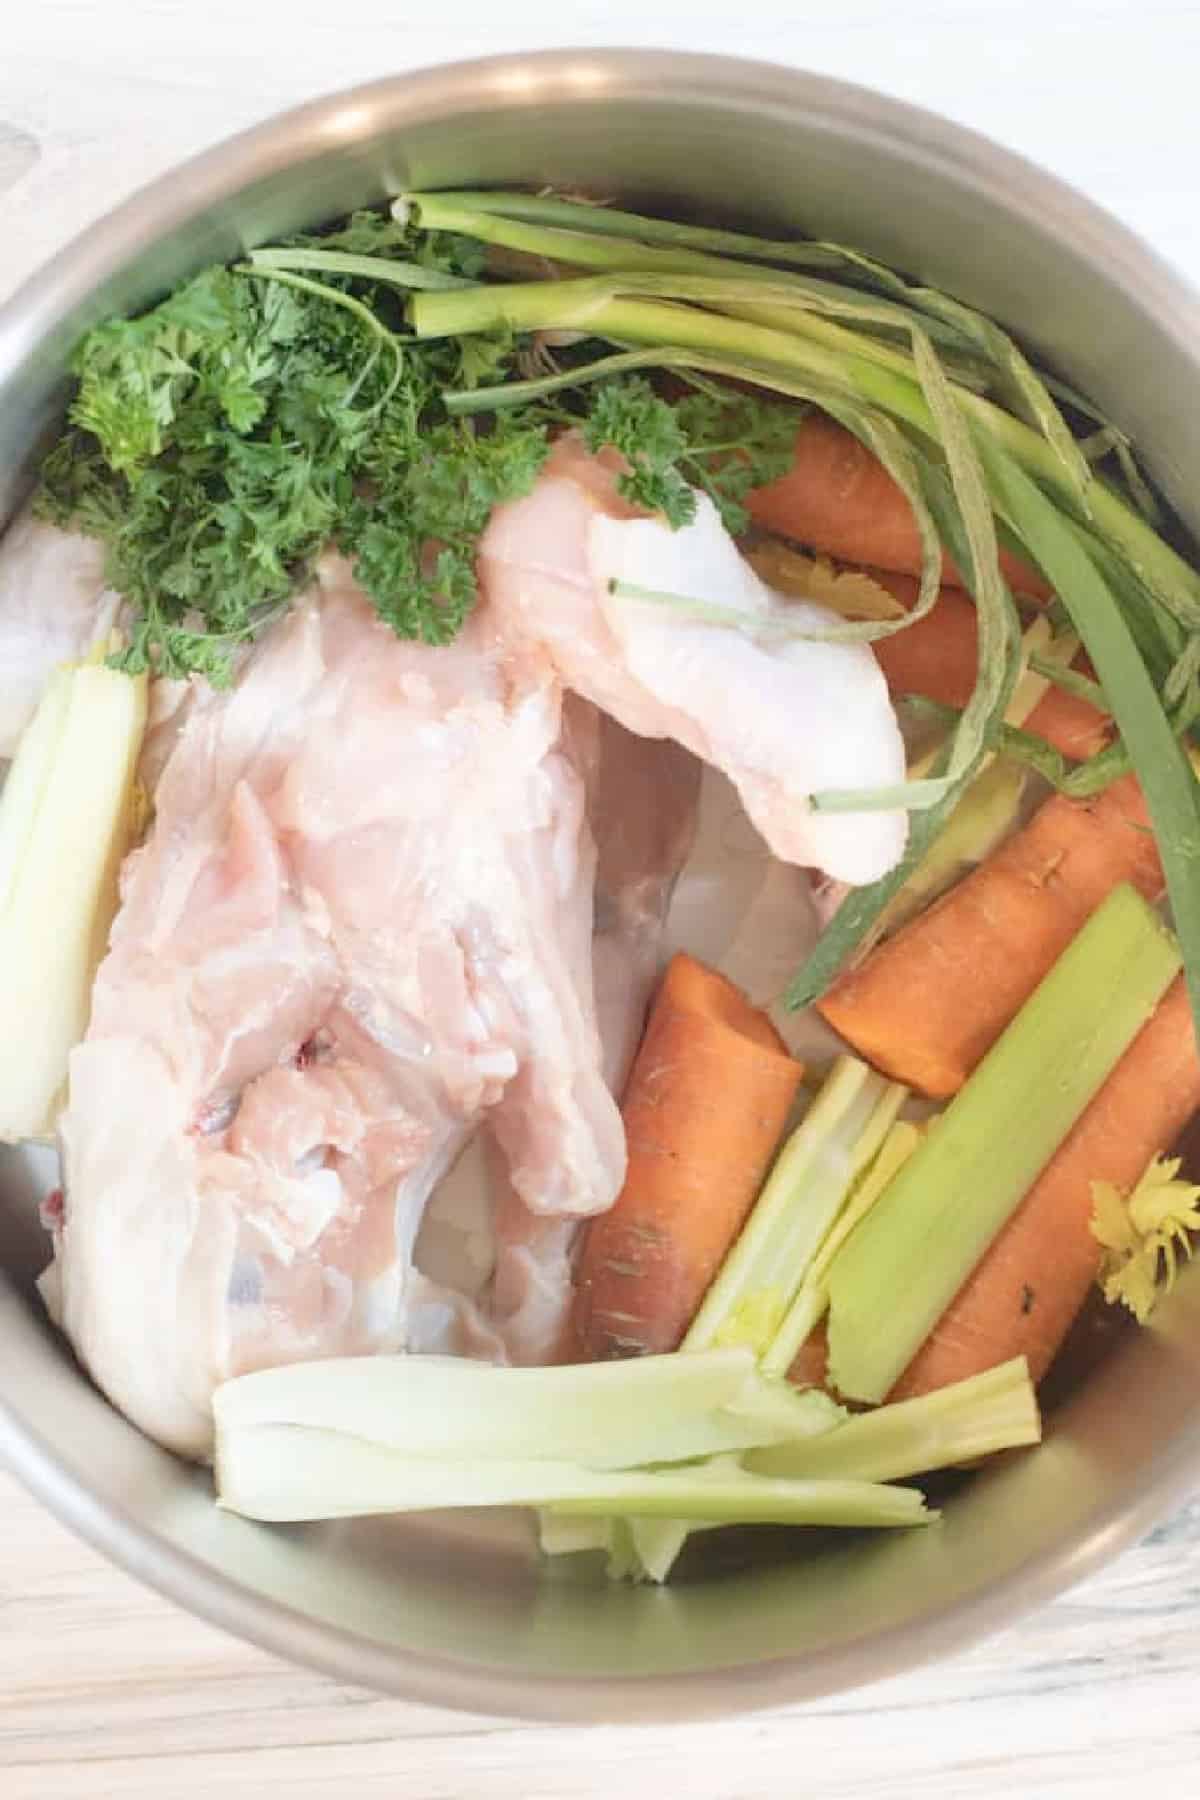 a pot of raw chicken and veggies.